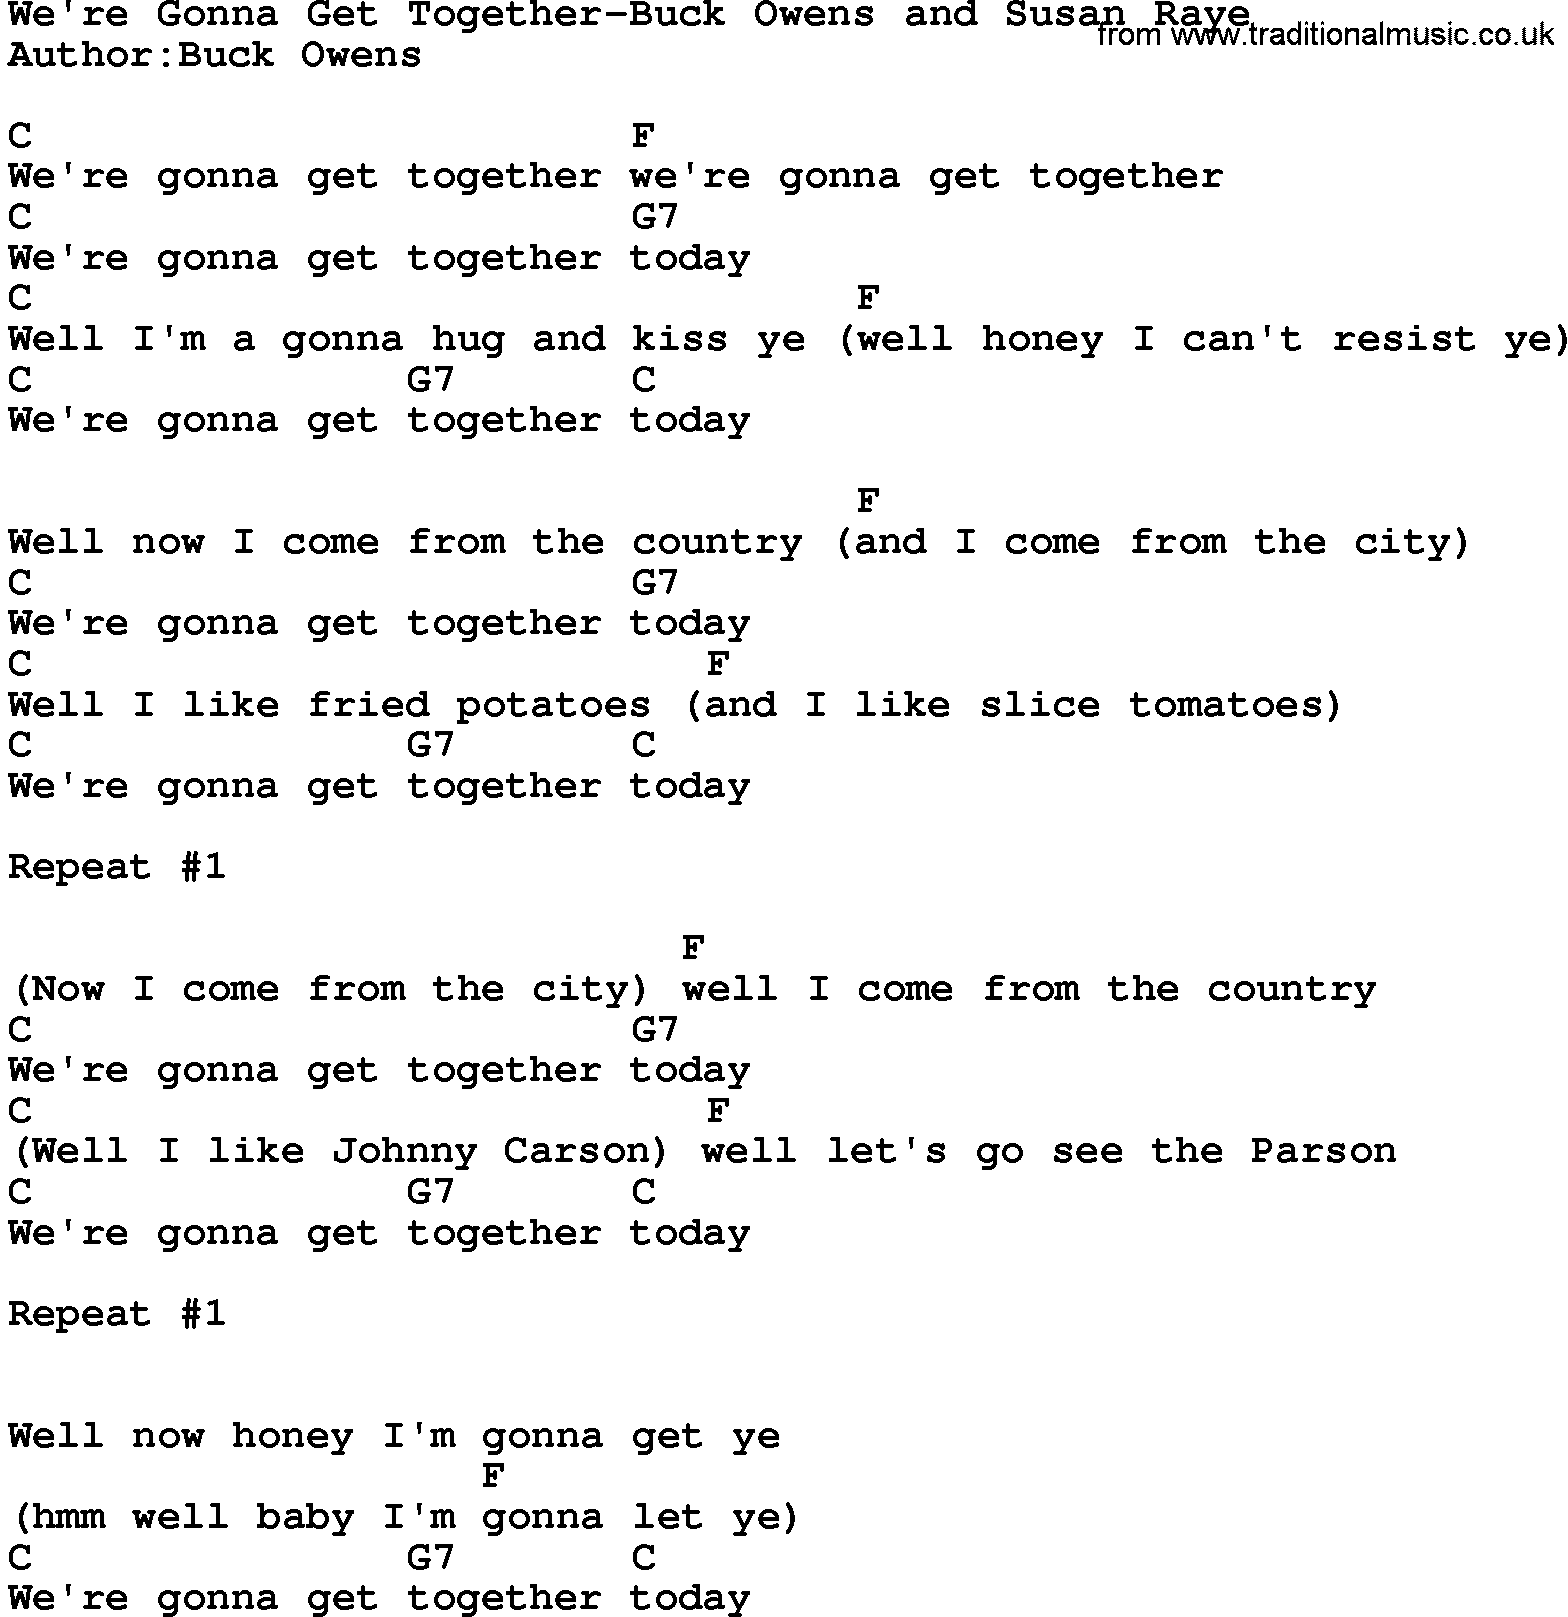 Country music song: We're Gonna Get Together-Buck Owens And Susan Raye lyrics and chords